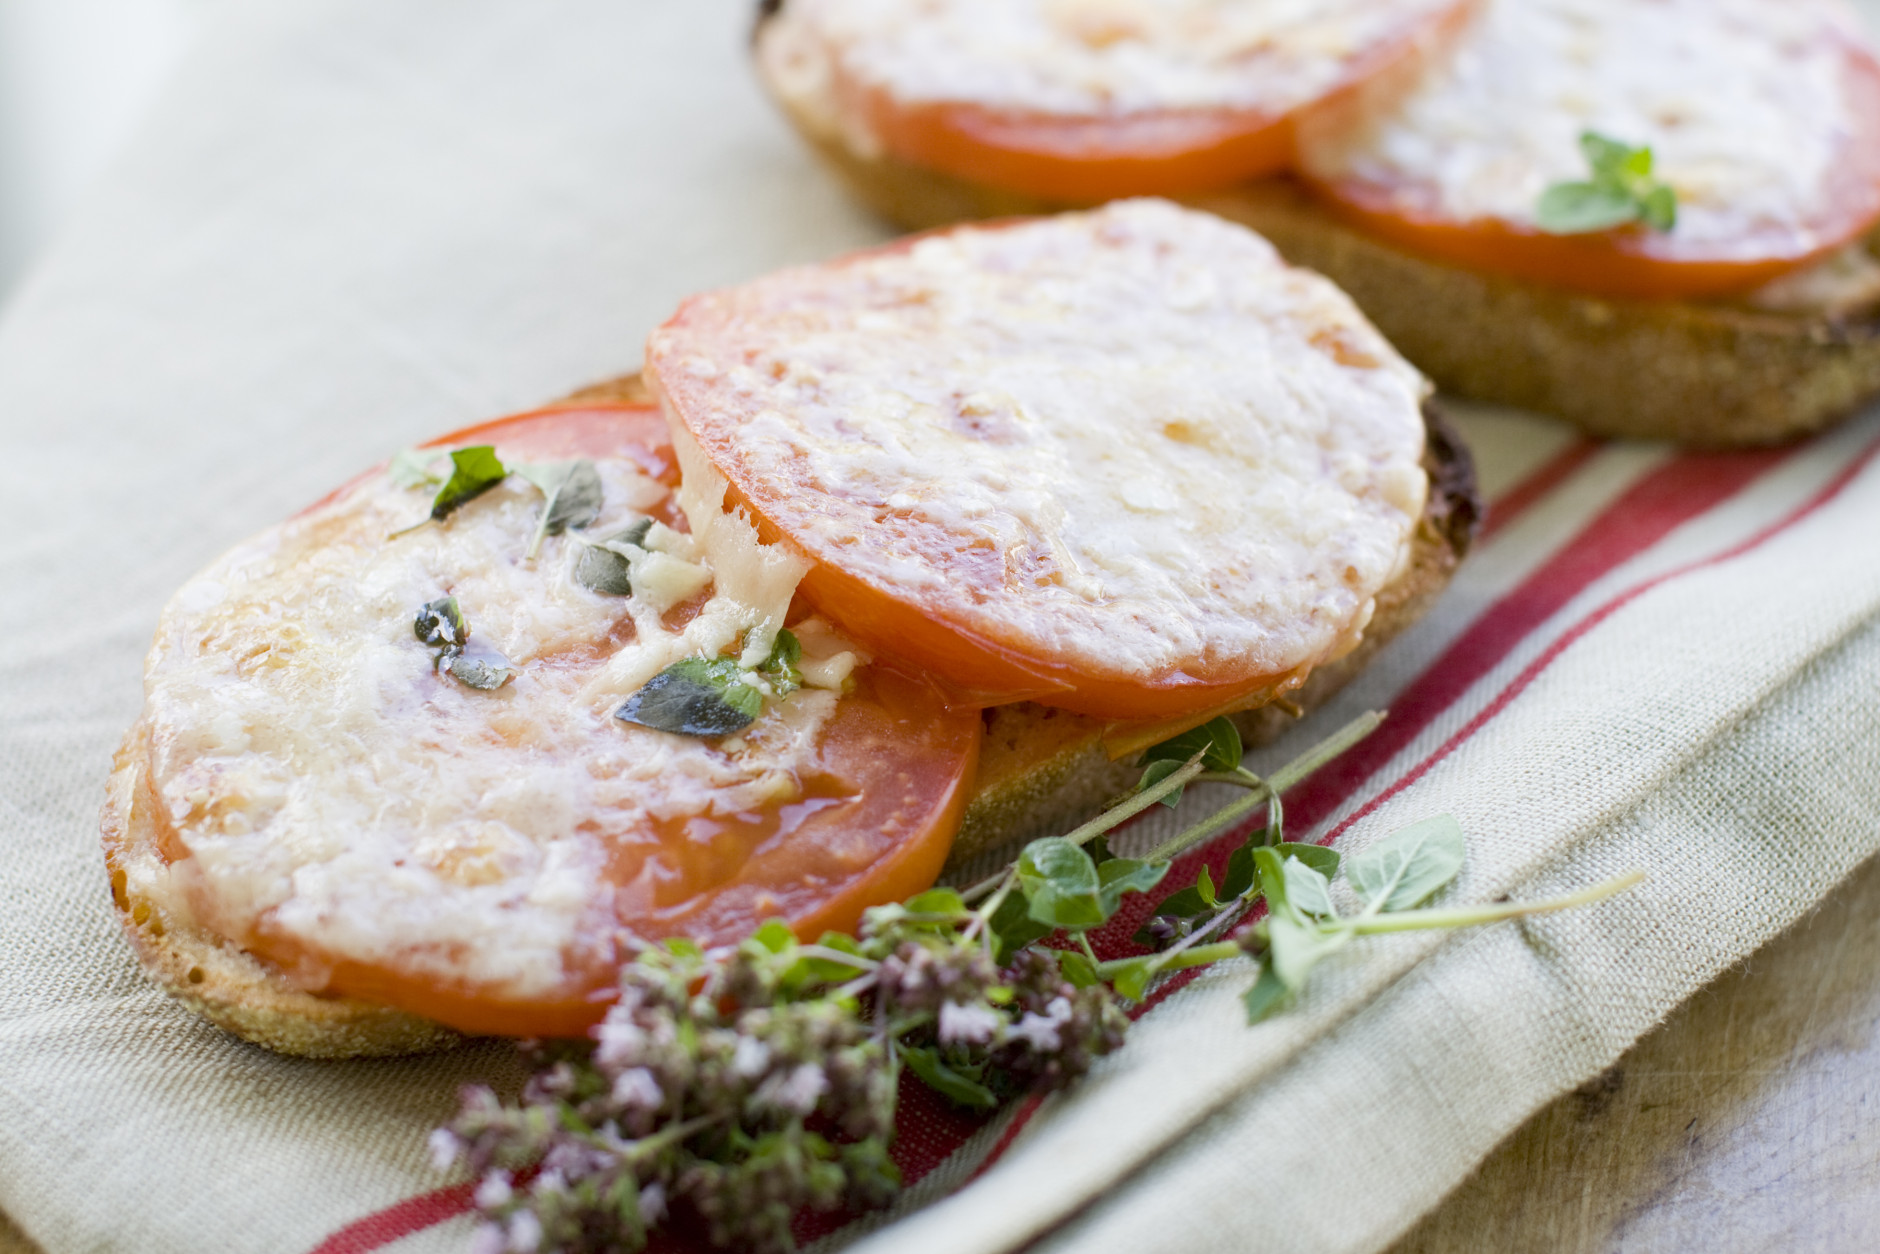 This July 15, 2013 photo shows toasted Parmesan tomato bread in Concord, N.H. (AP Photo/Matthew Mead)